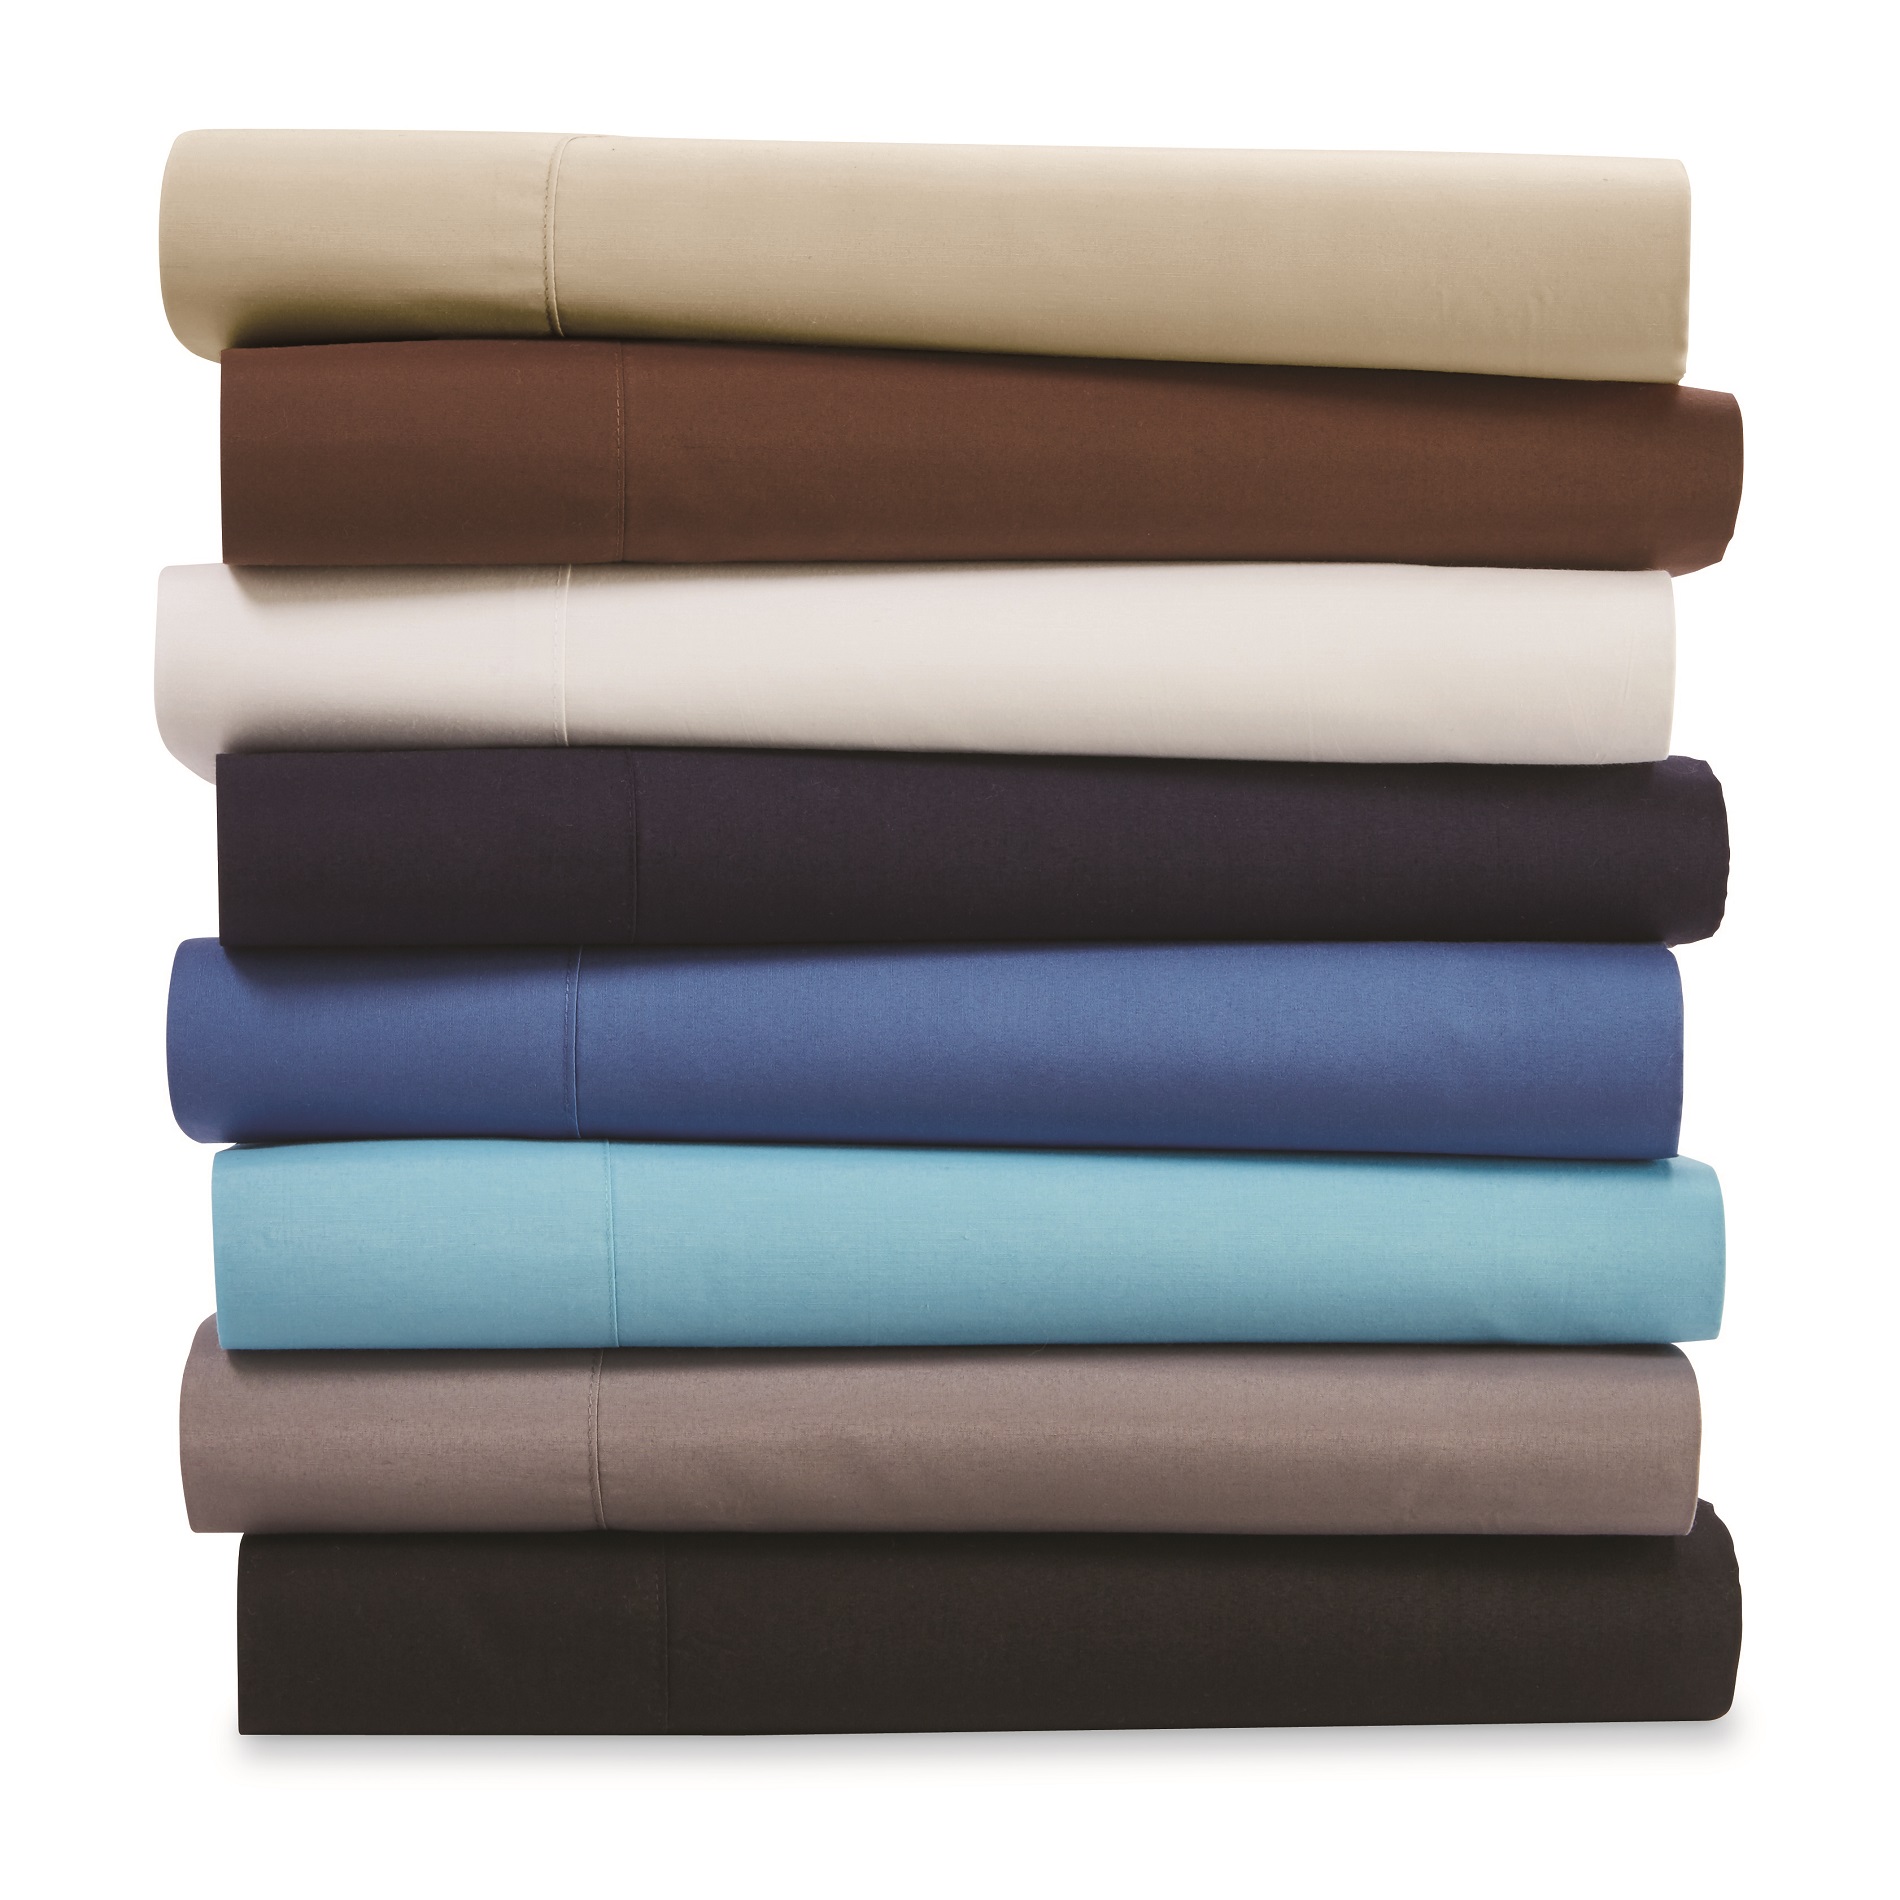 Cannon 200 Thread Count 2-Pack Standard Pillowcases